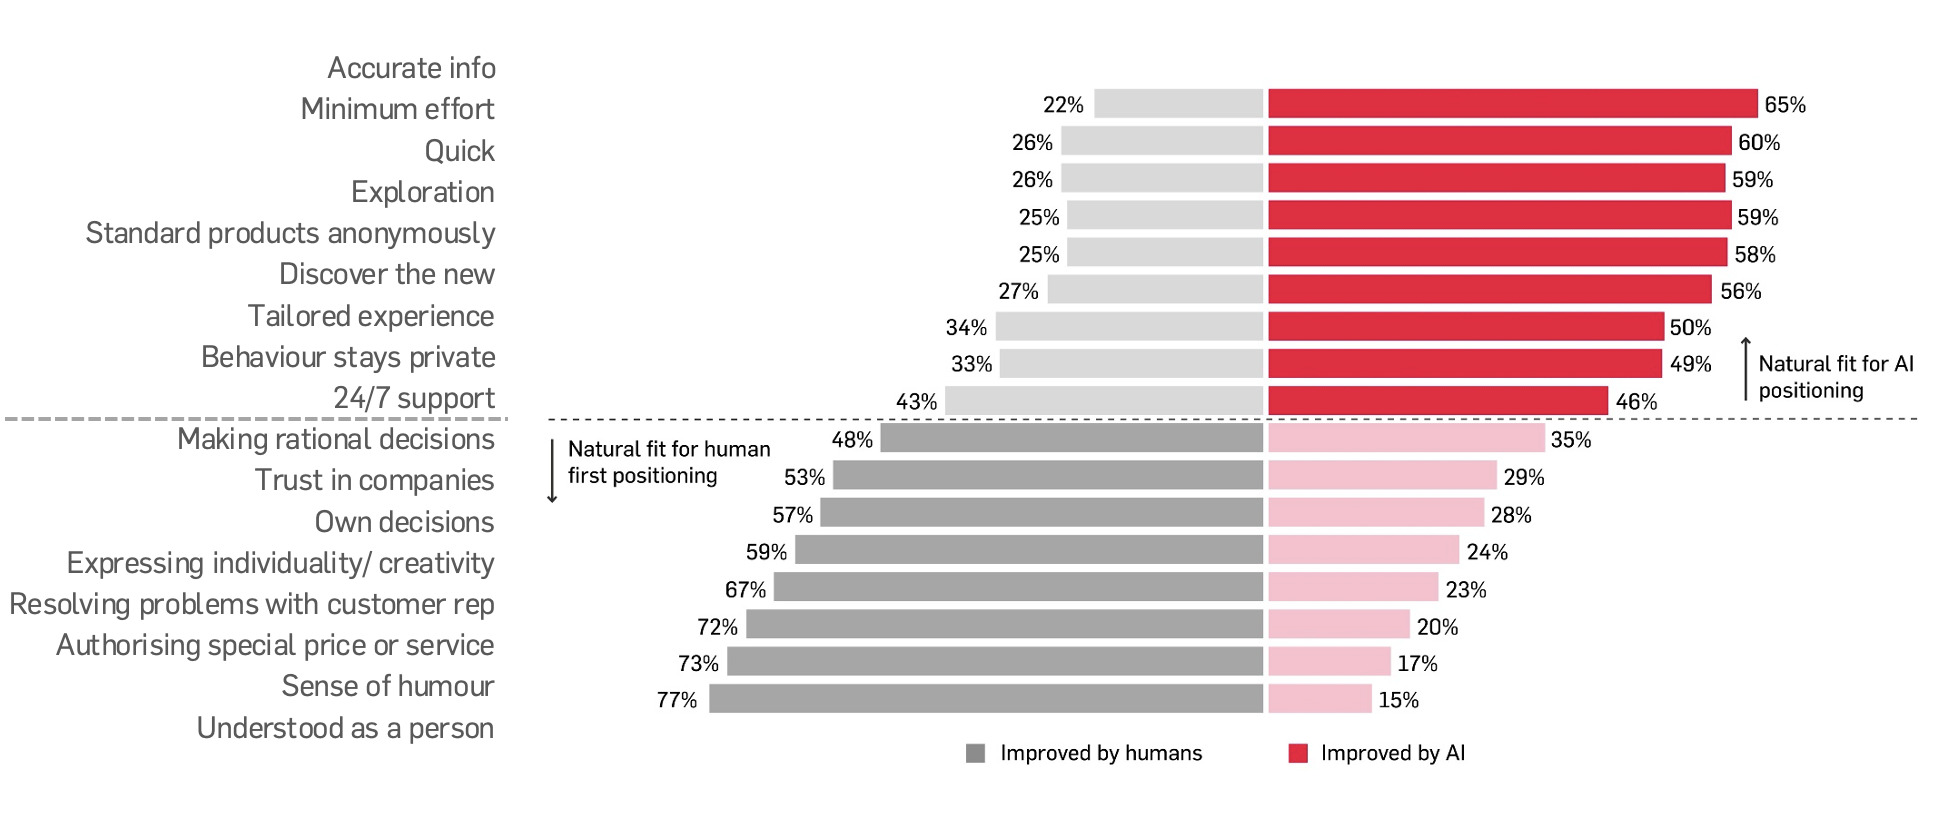 Bar chart showing whether service touchpoints could be better improved by humans or by AI, according to survey respondents